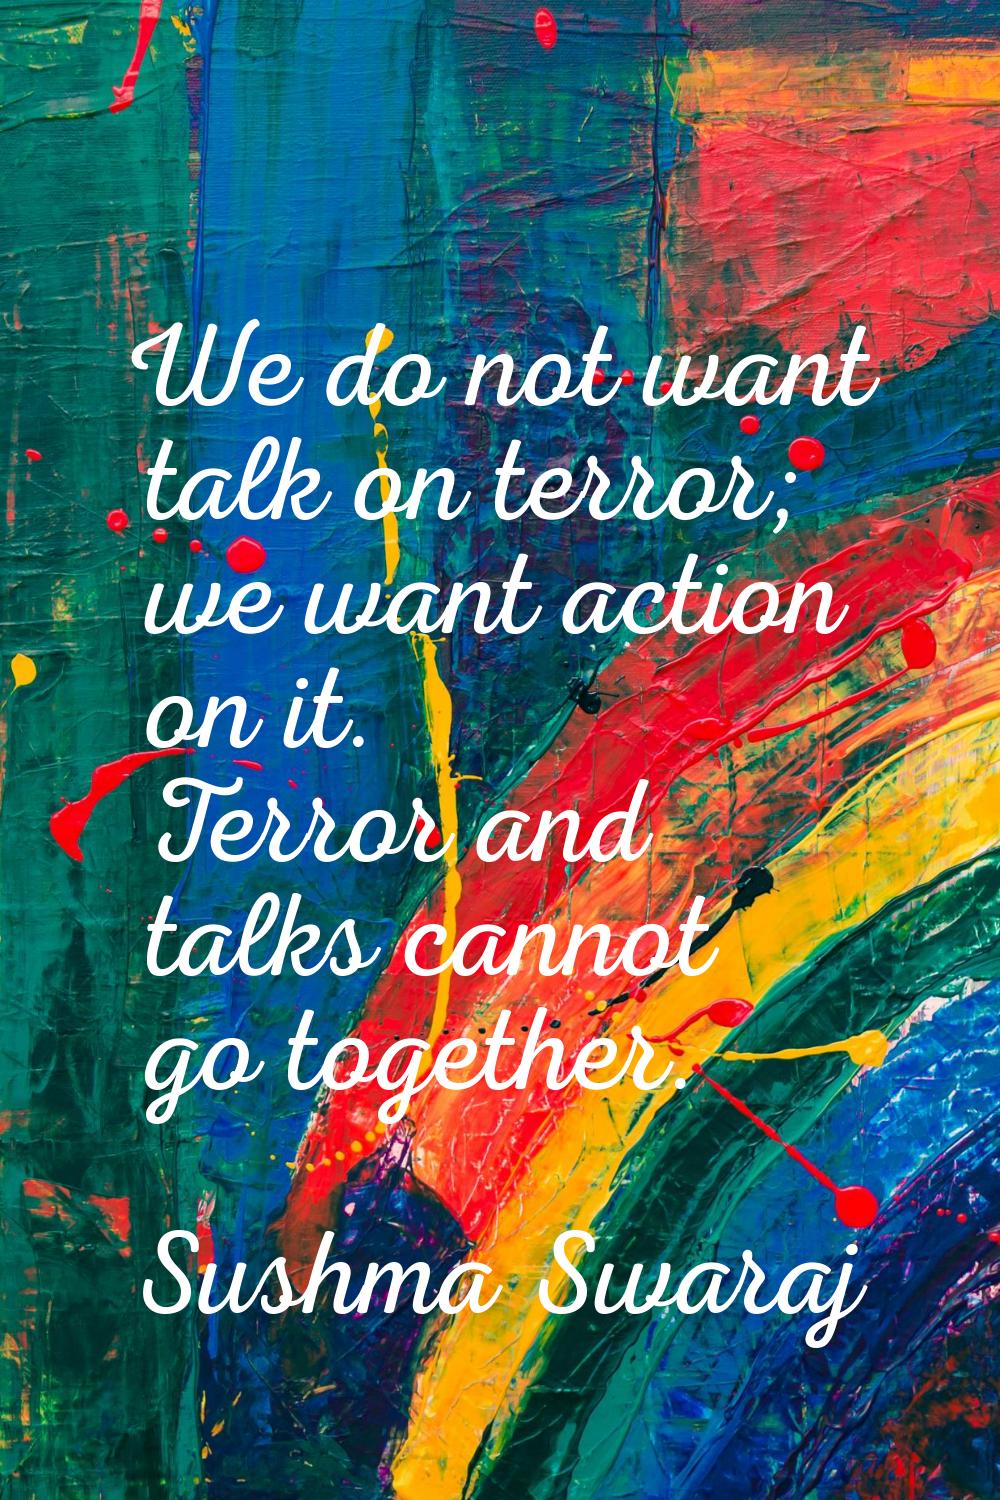 We do not want talk on terror; we want action on it. Terror and talks cannot go together.